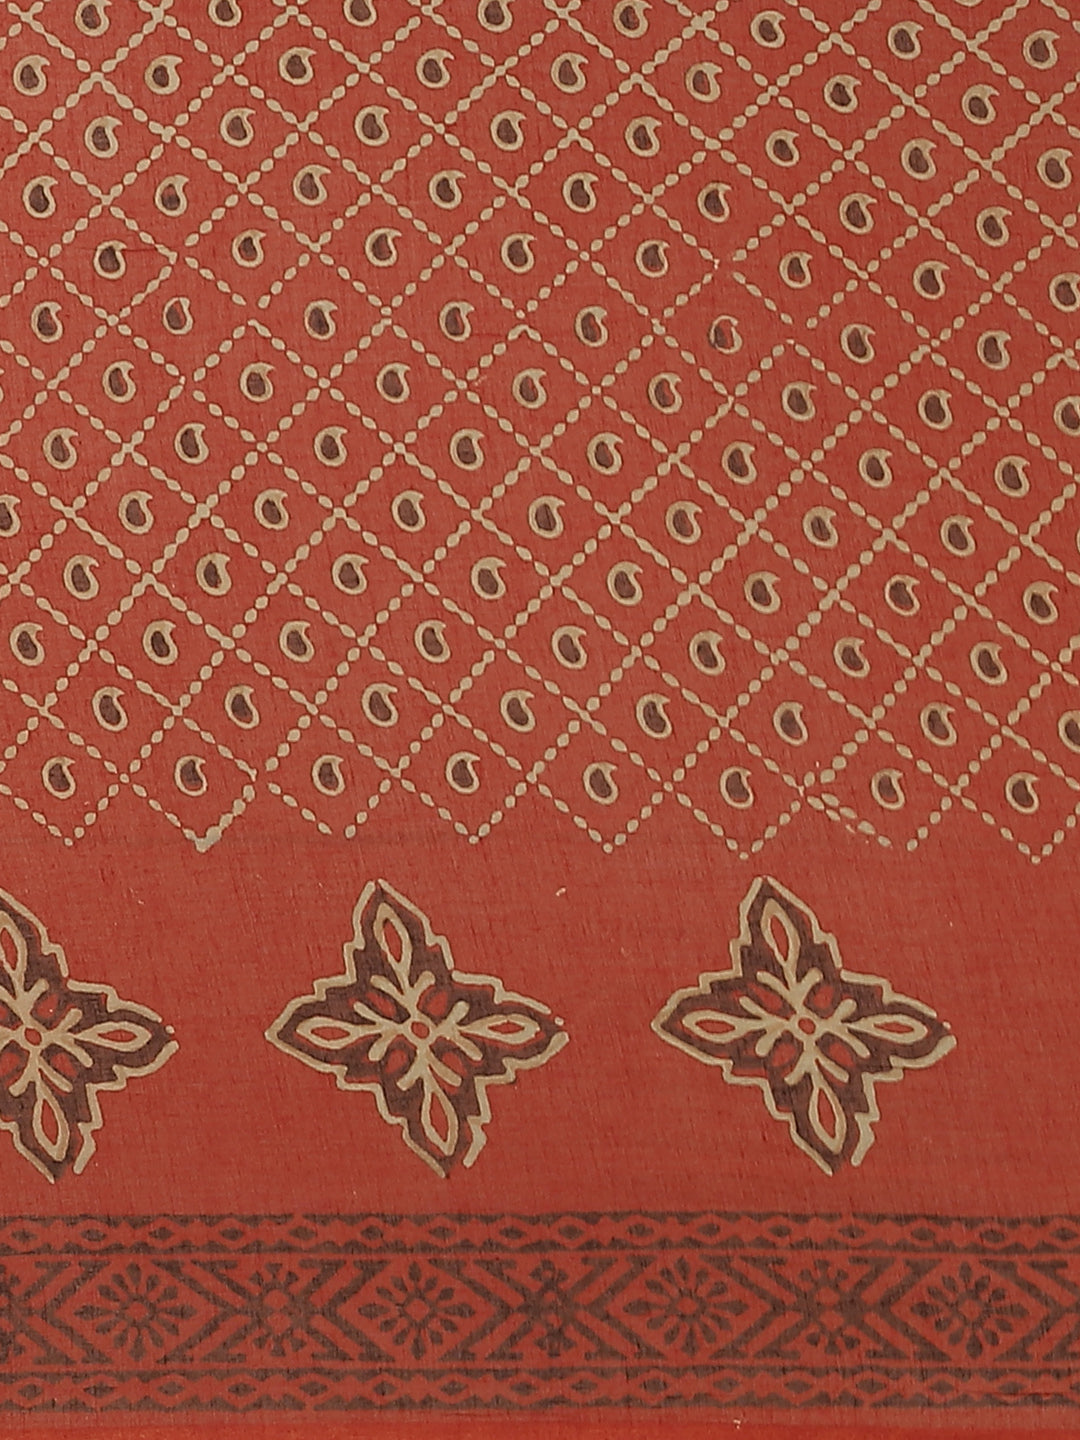 Brown and White, Kalakari India Pure Cotton Hand Block Printed Saree and Blouse BAPASA0100-Saree-Kalakari India-BAPASA0100-Block Print, Cotton, Geographical Indication, Hand Crafted, Heritage Prints, Natural Dyes, Red, Sarees, Sustainable Fabrics, Woven, Yellow-[Linen,Ethnic,wear,Fashionista,Handloom,Handicraft,Indigo,blockprint,block,print,Cotton,Chanderi,Blue, latest,classy,party,bollywood,trendy,summer,style,traditional,formal,elegant,unique,style,hand,block,print, dabu,booti,gift,present,gla